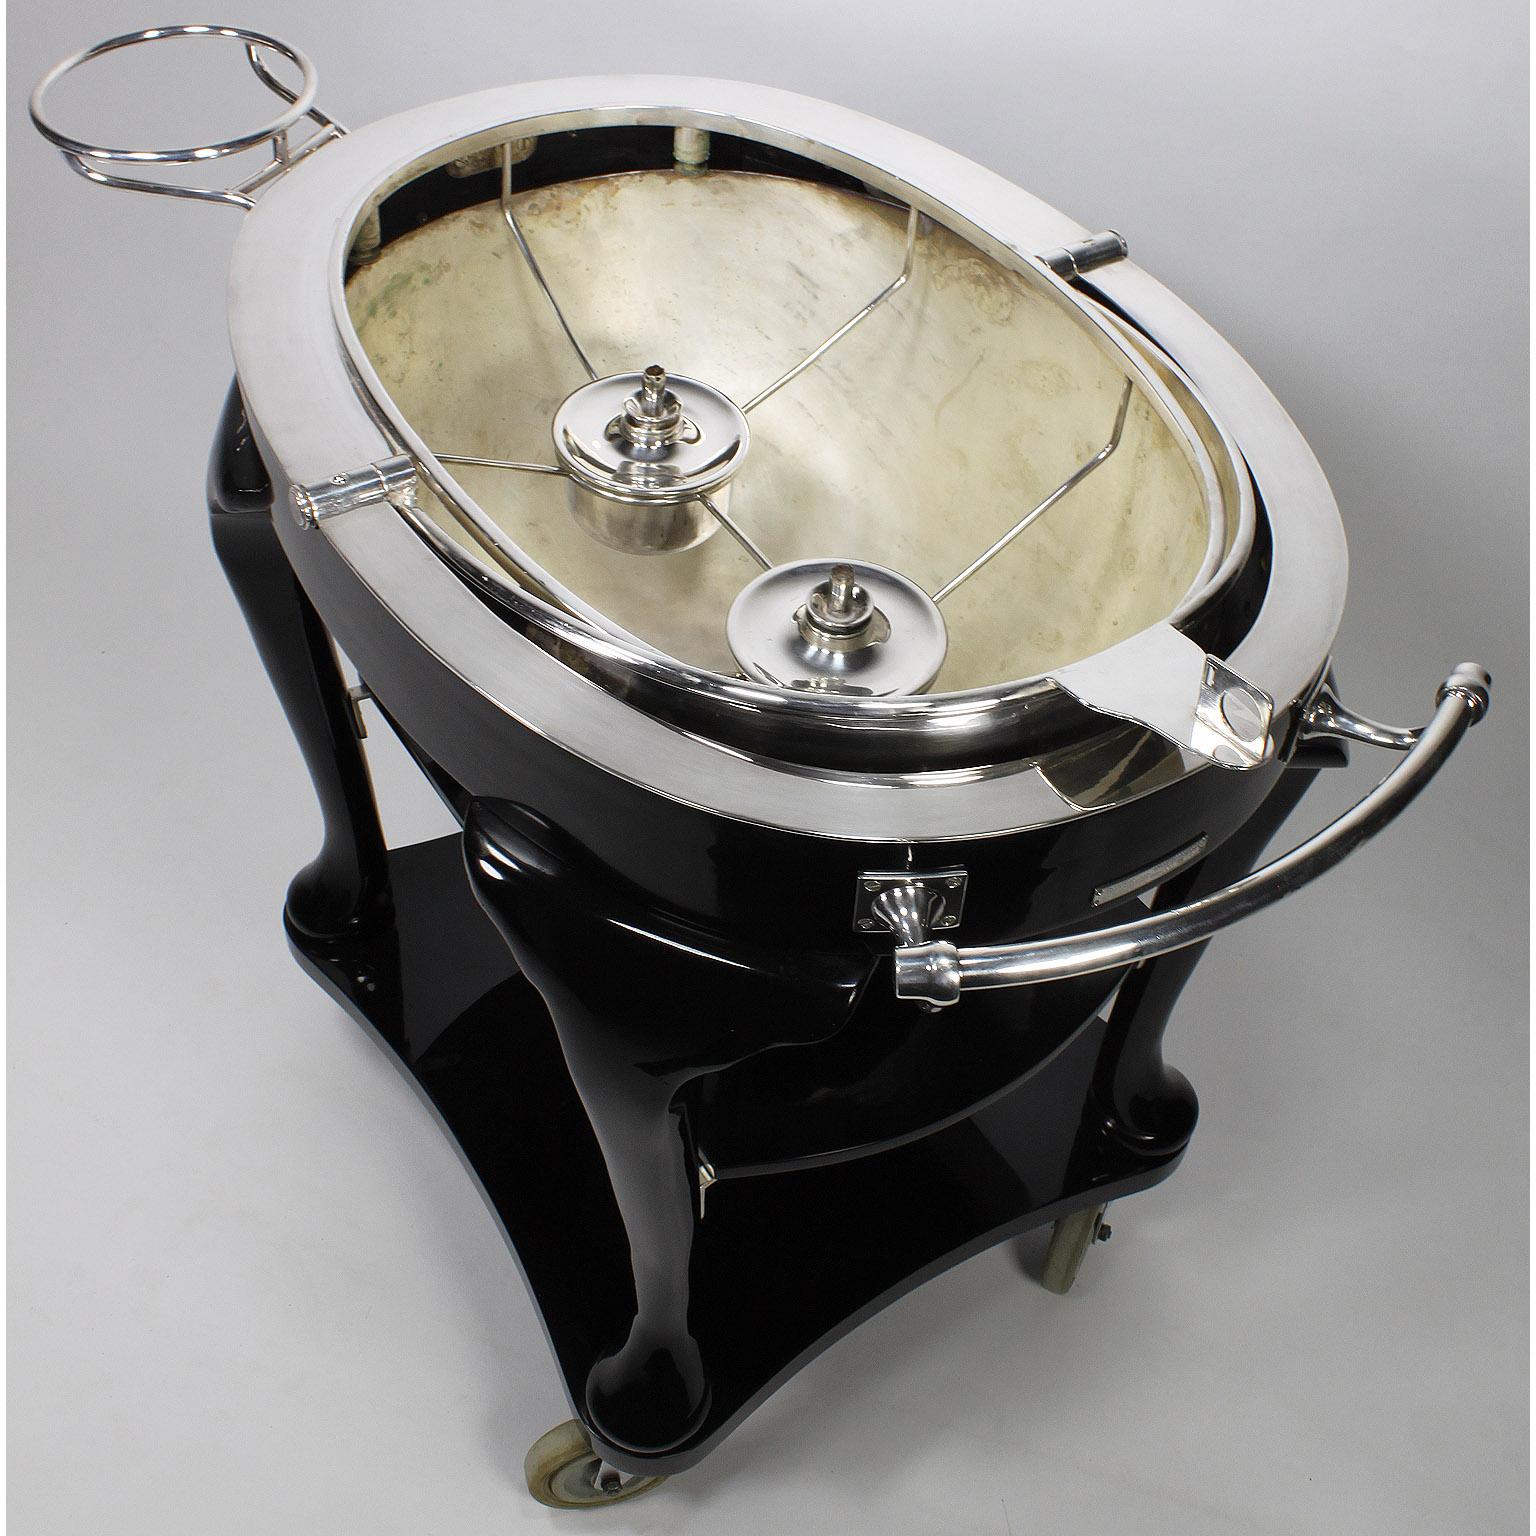 English 1930s Art Deco Ebonized & Silver Plated Beef/Turkey/Lamb Carving Trolley For Sale 9